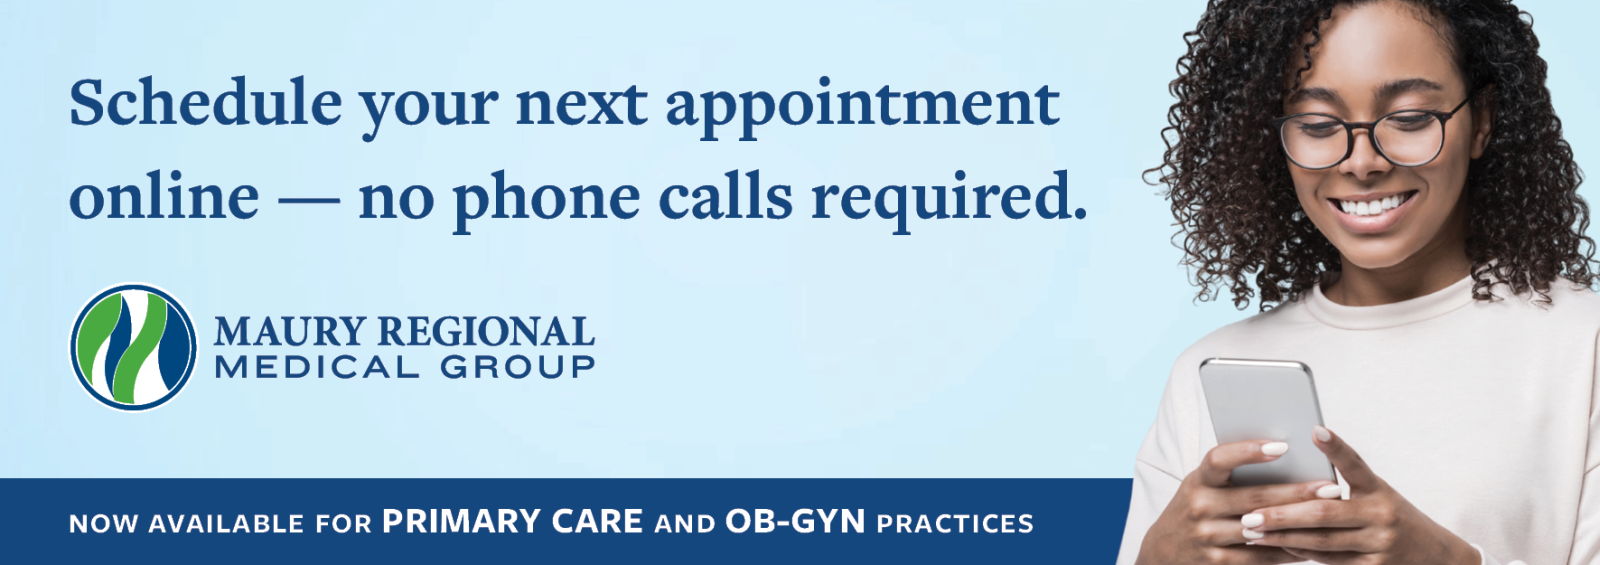 Girl using a cell phone. Text reads, "Schedule your next appointment online -- no phone calls required. Online scheduling is now available for primary care and OB-GYN visits.